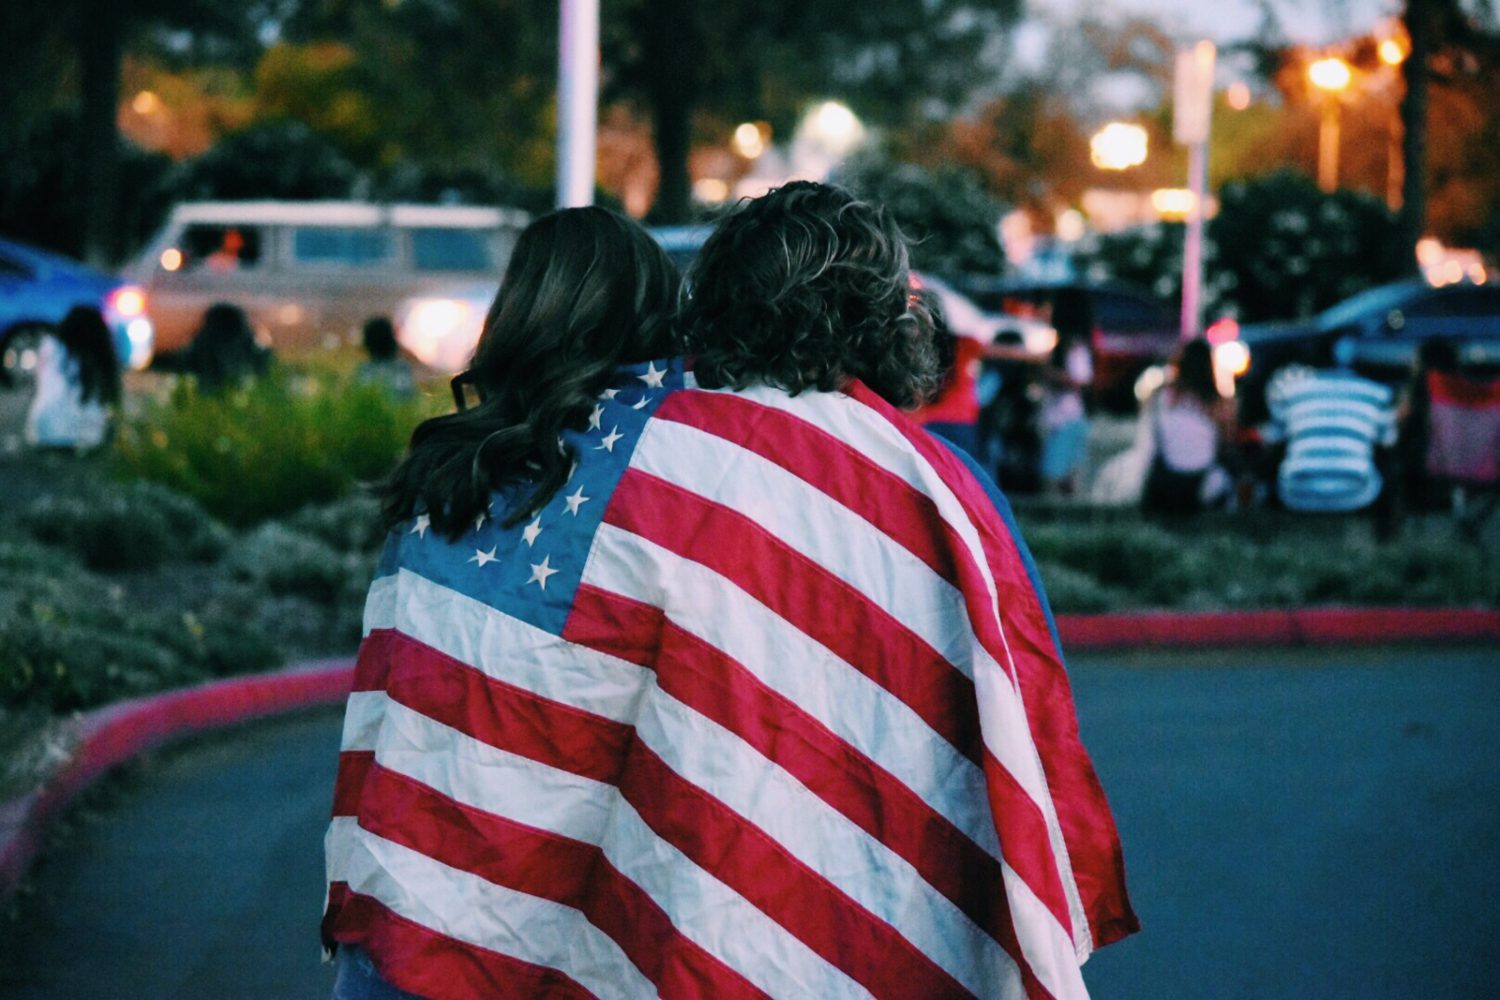 Two women wrapped in an American flag